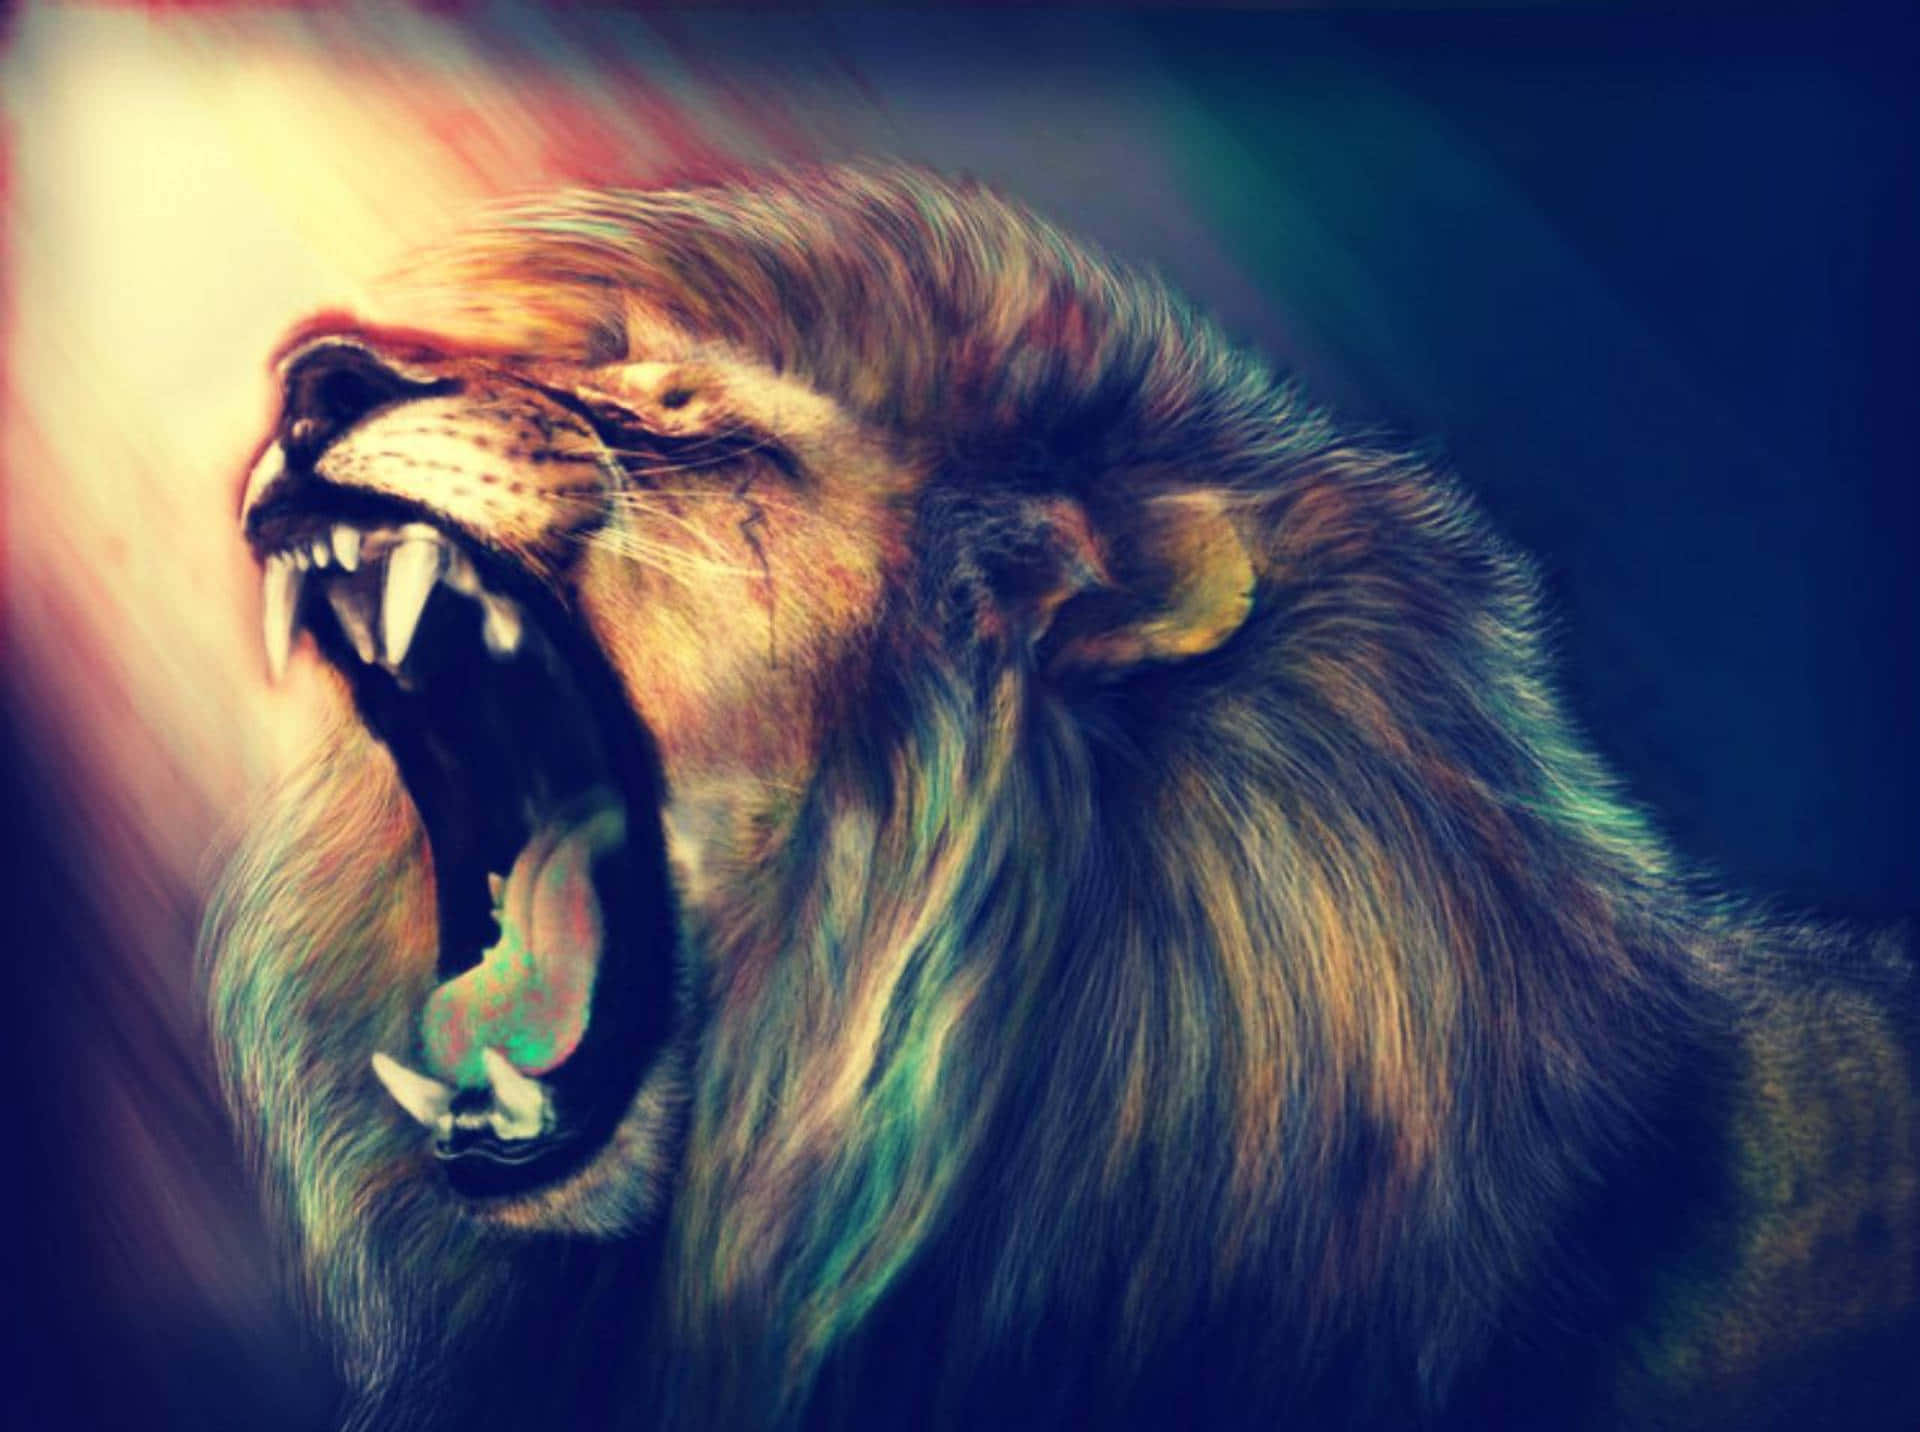 Rise and Roar - The Power of Nature Wallpaper